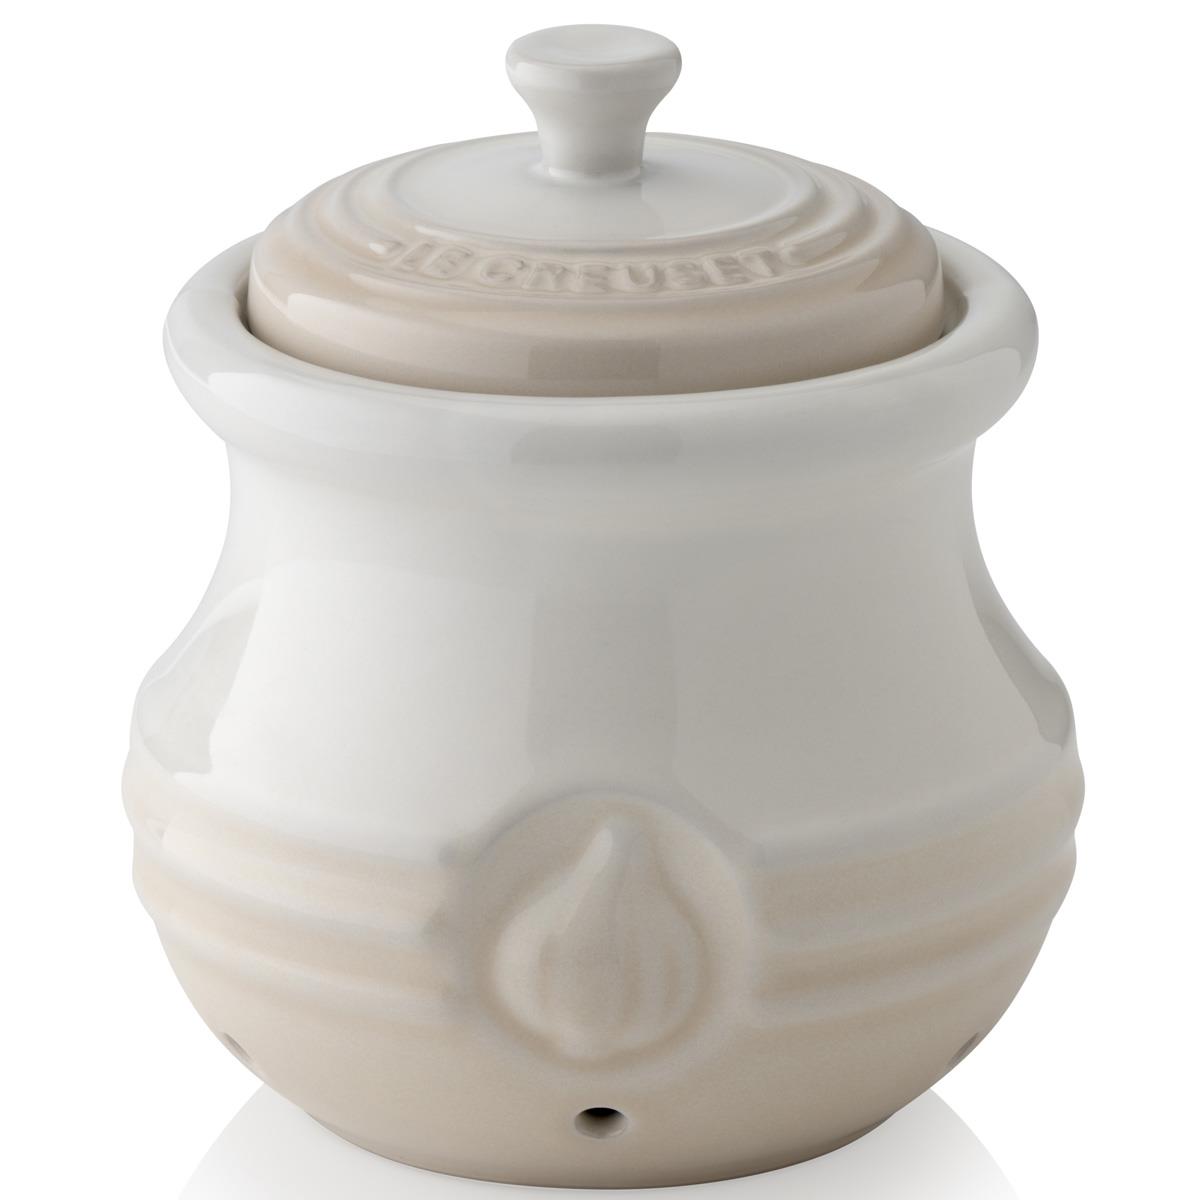 What is the capacity of the Le Creuset garlic keeper for garlic bulbs?